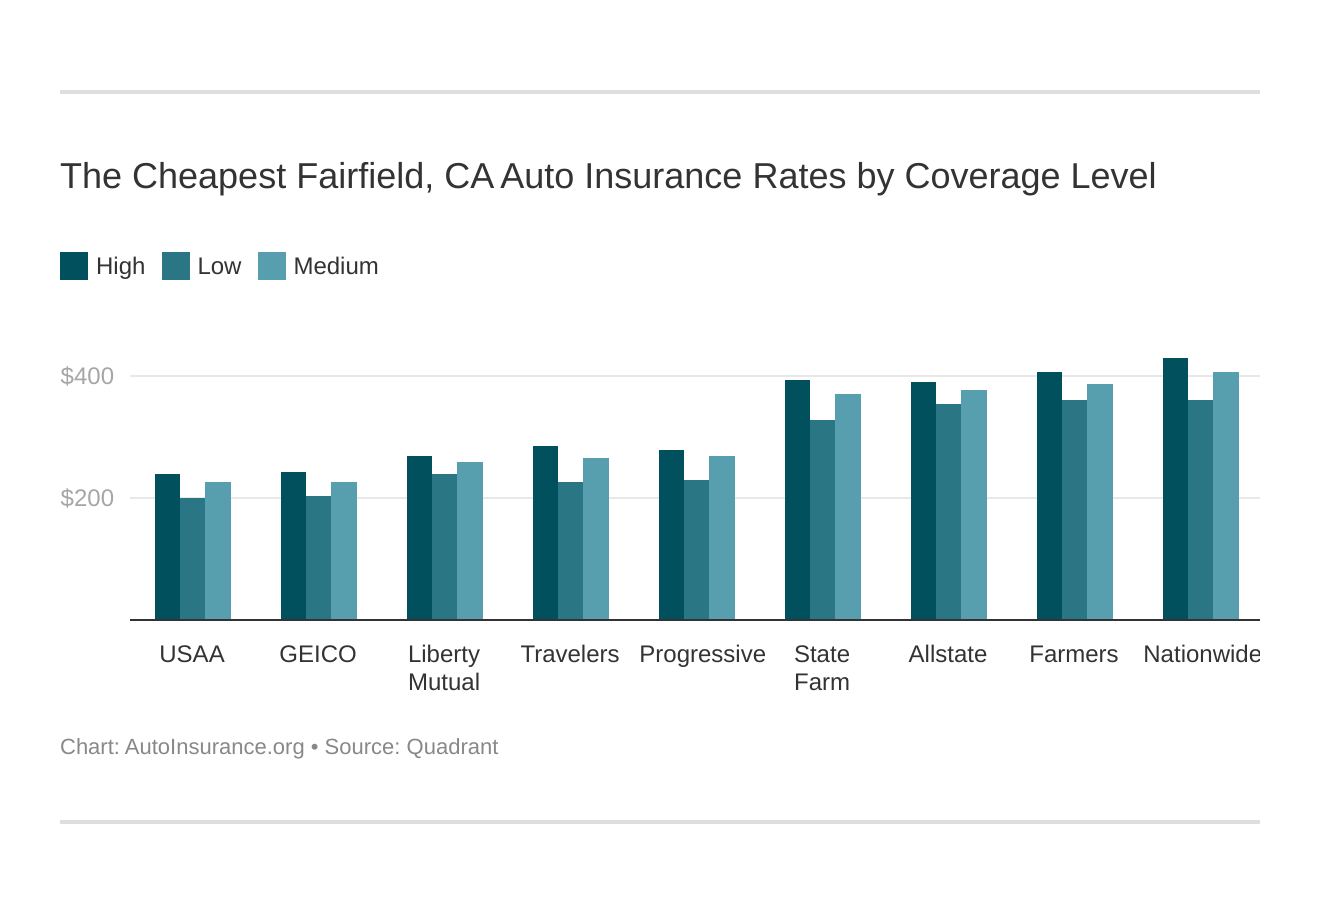 The Cheapest Fairfield, CA Auto Insurance Rates by Coverage Level